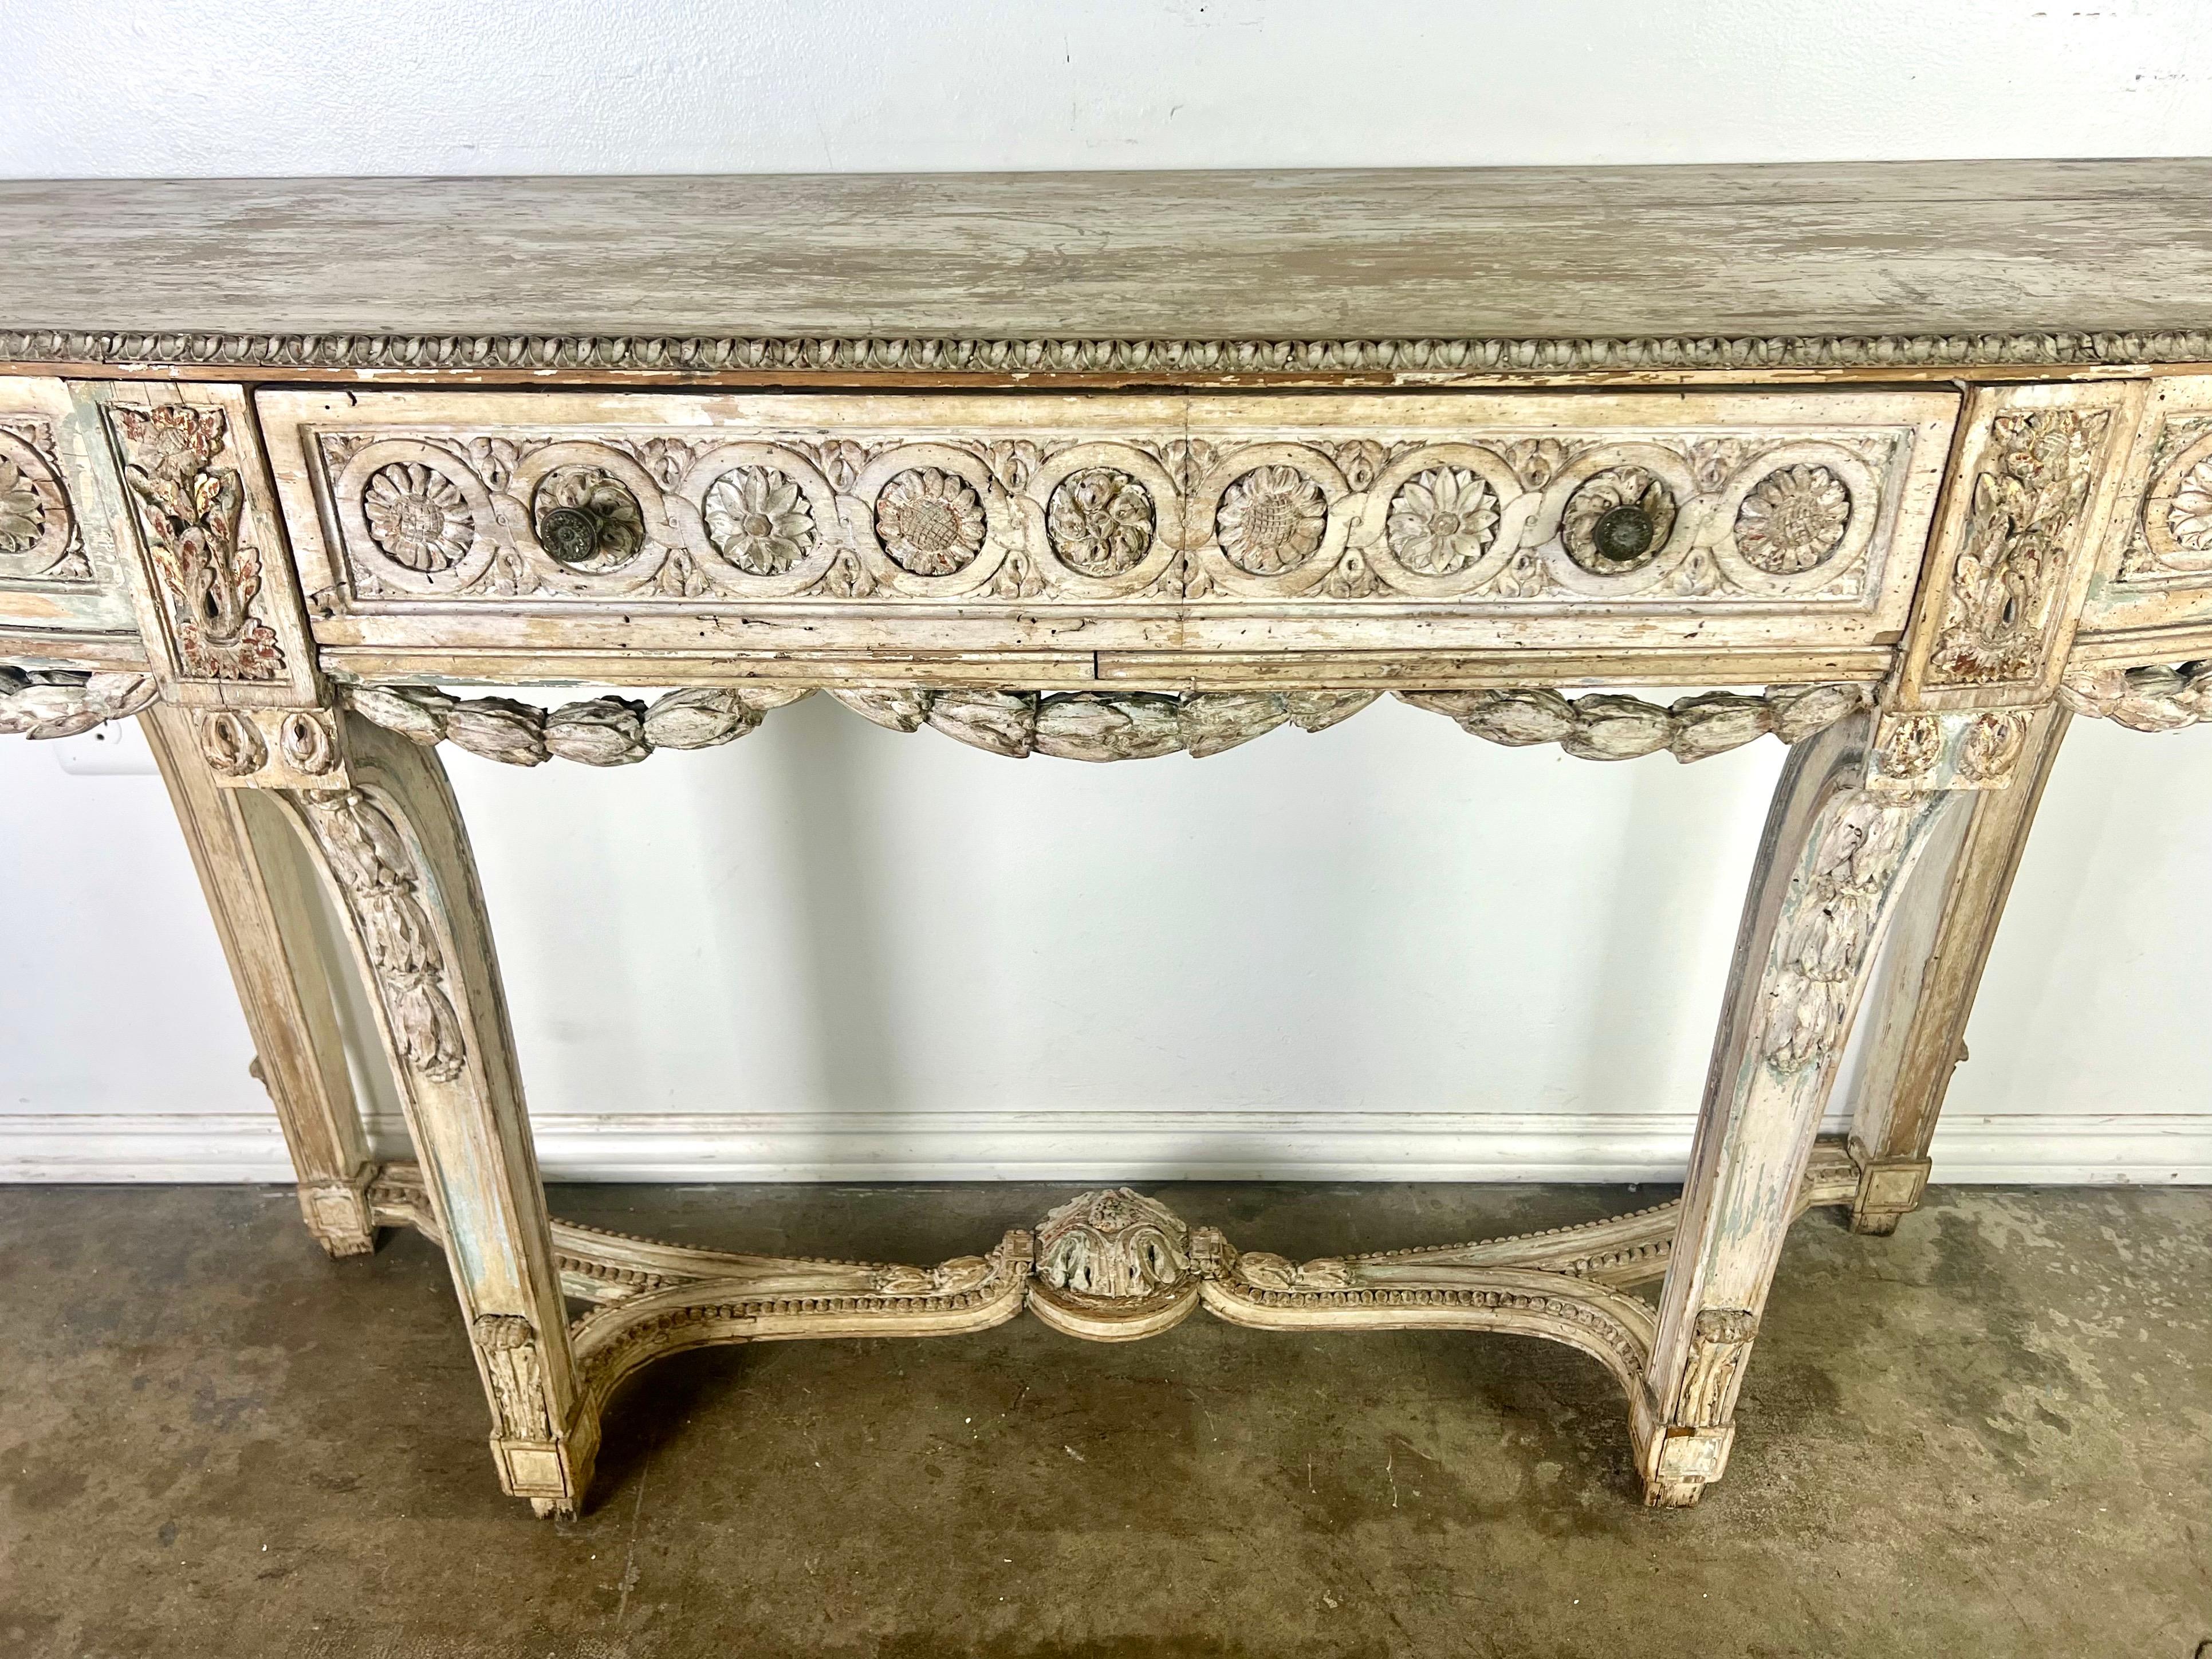 French Provincial 19th Century French Painted Console w/ Carved Swags & Drawers